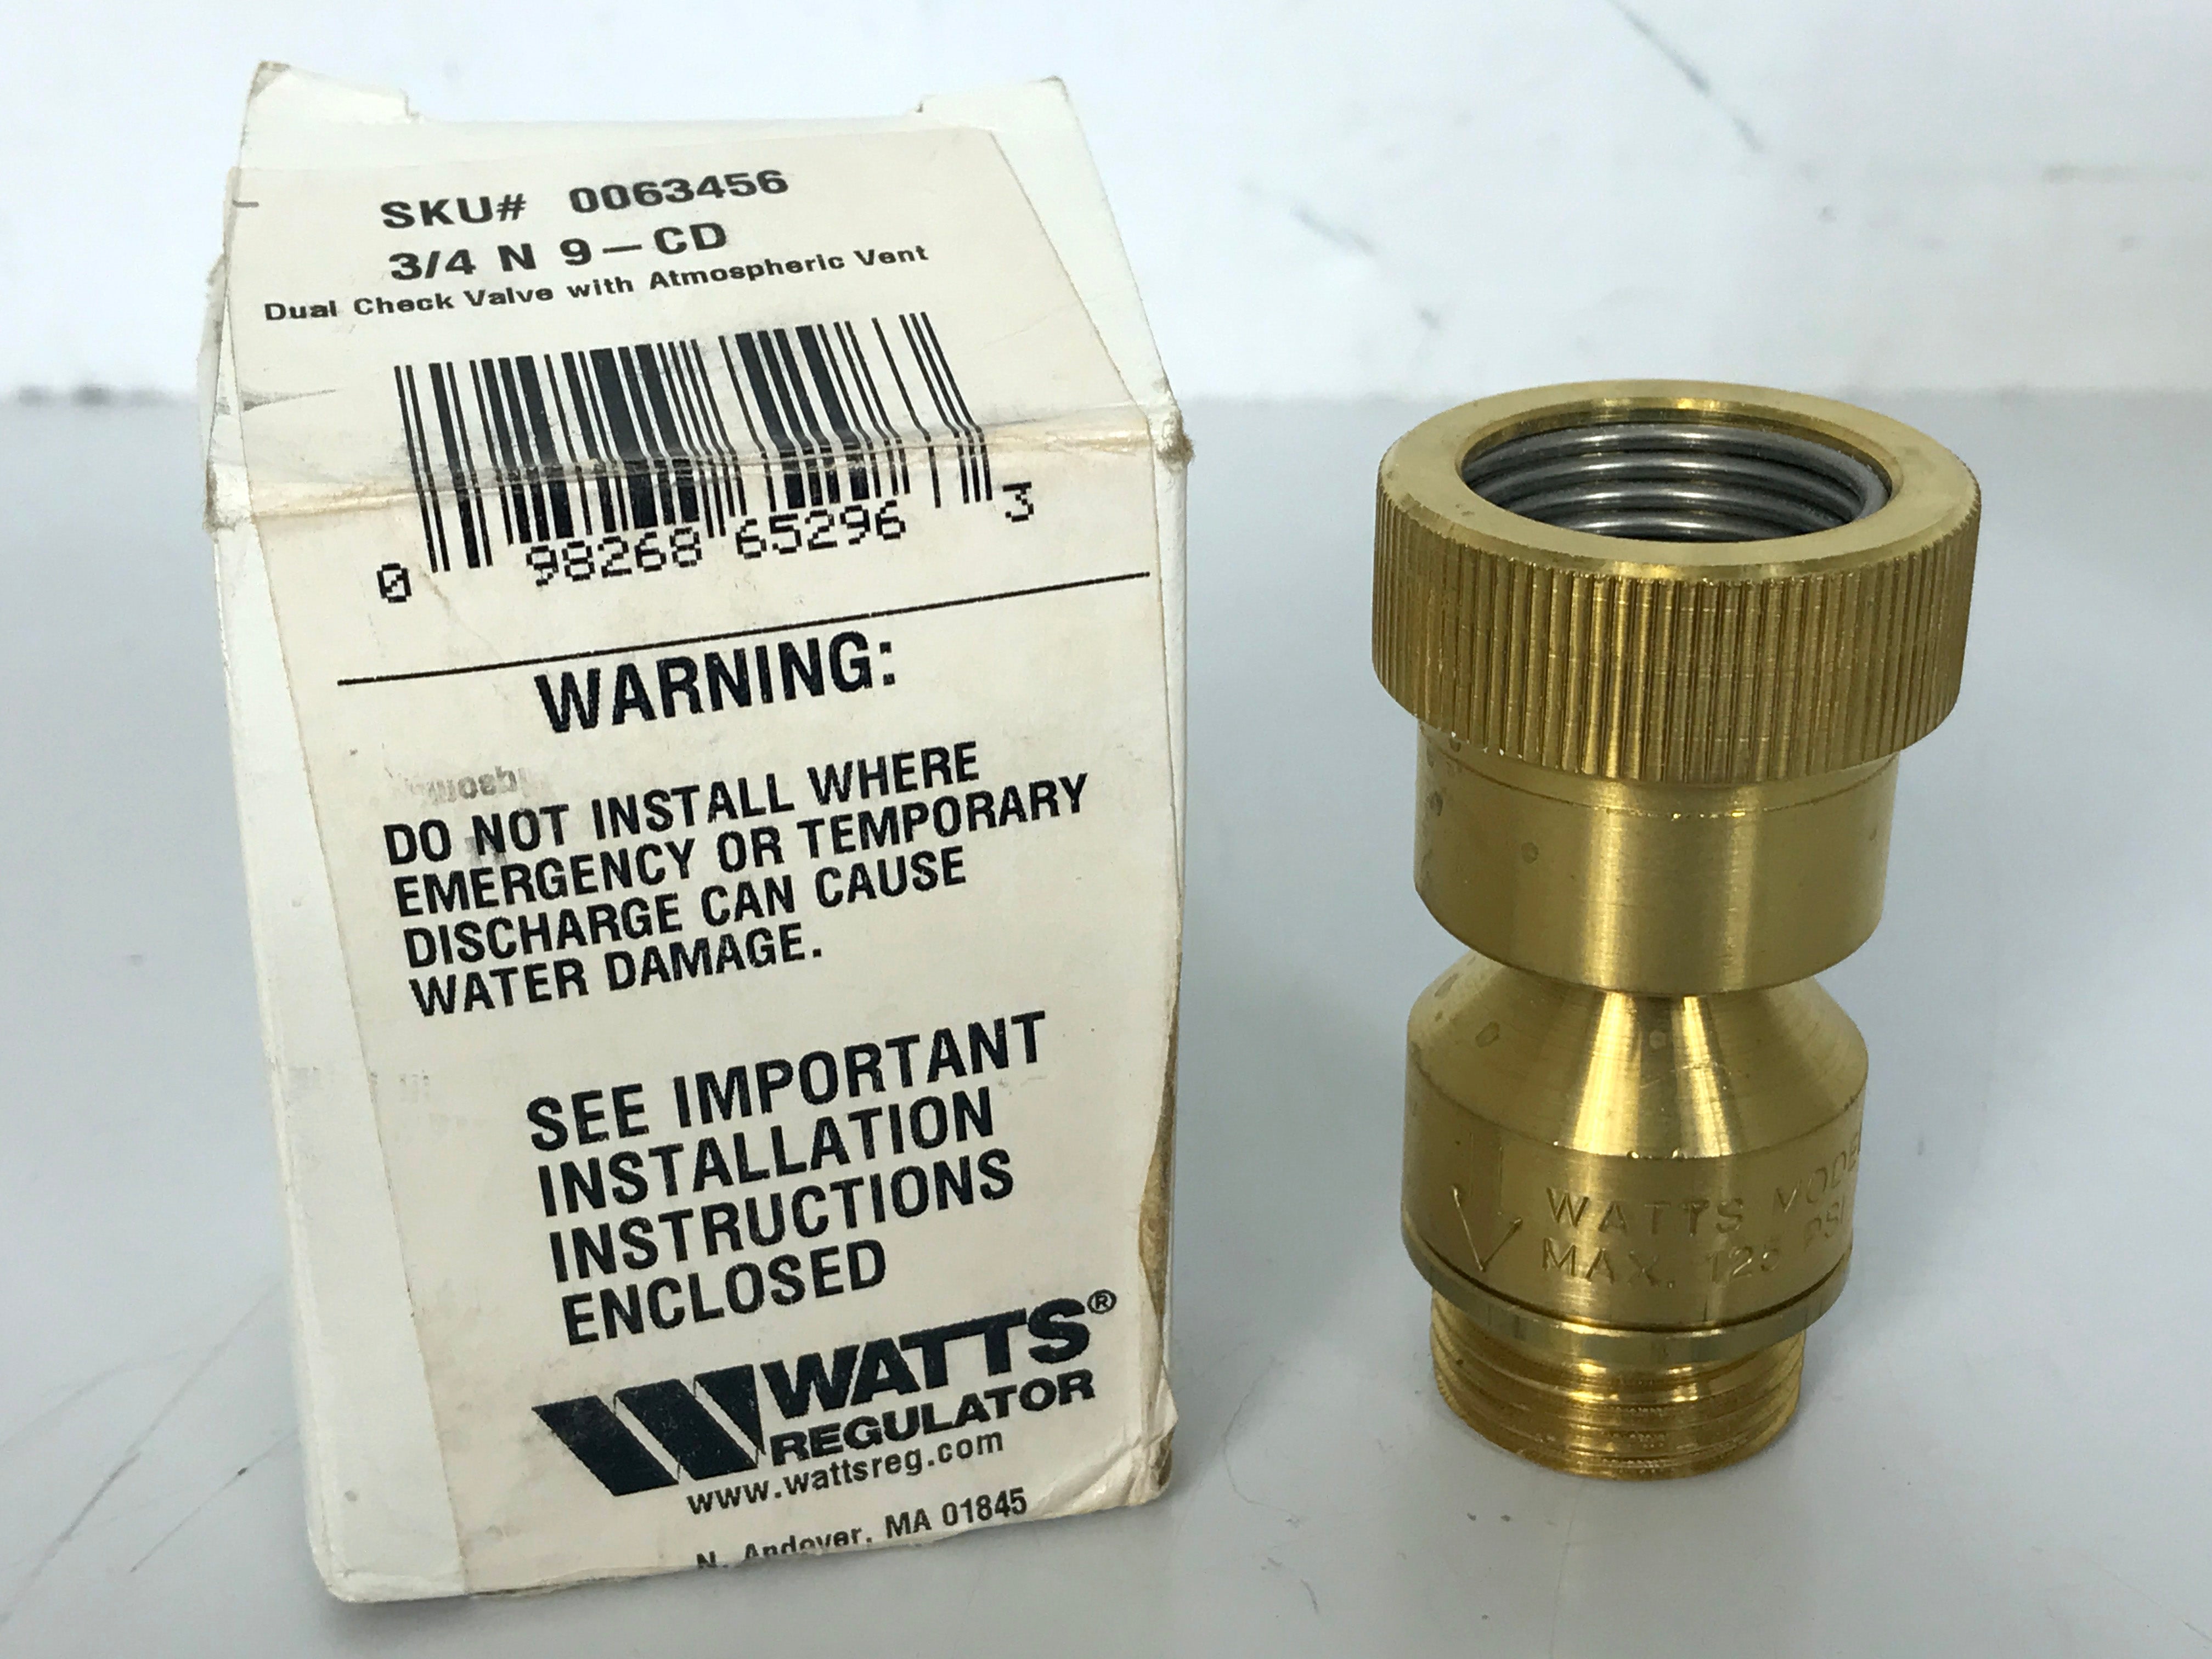 Watts 3/4" N9-CD Dual Check Valve with Atmospheric Vent 0063456